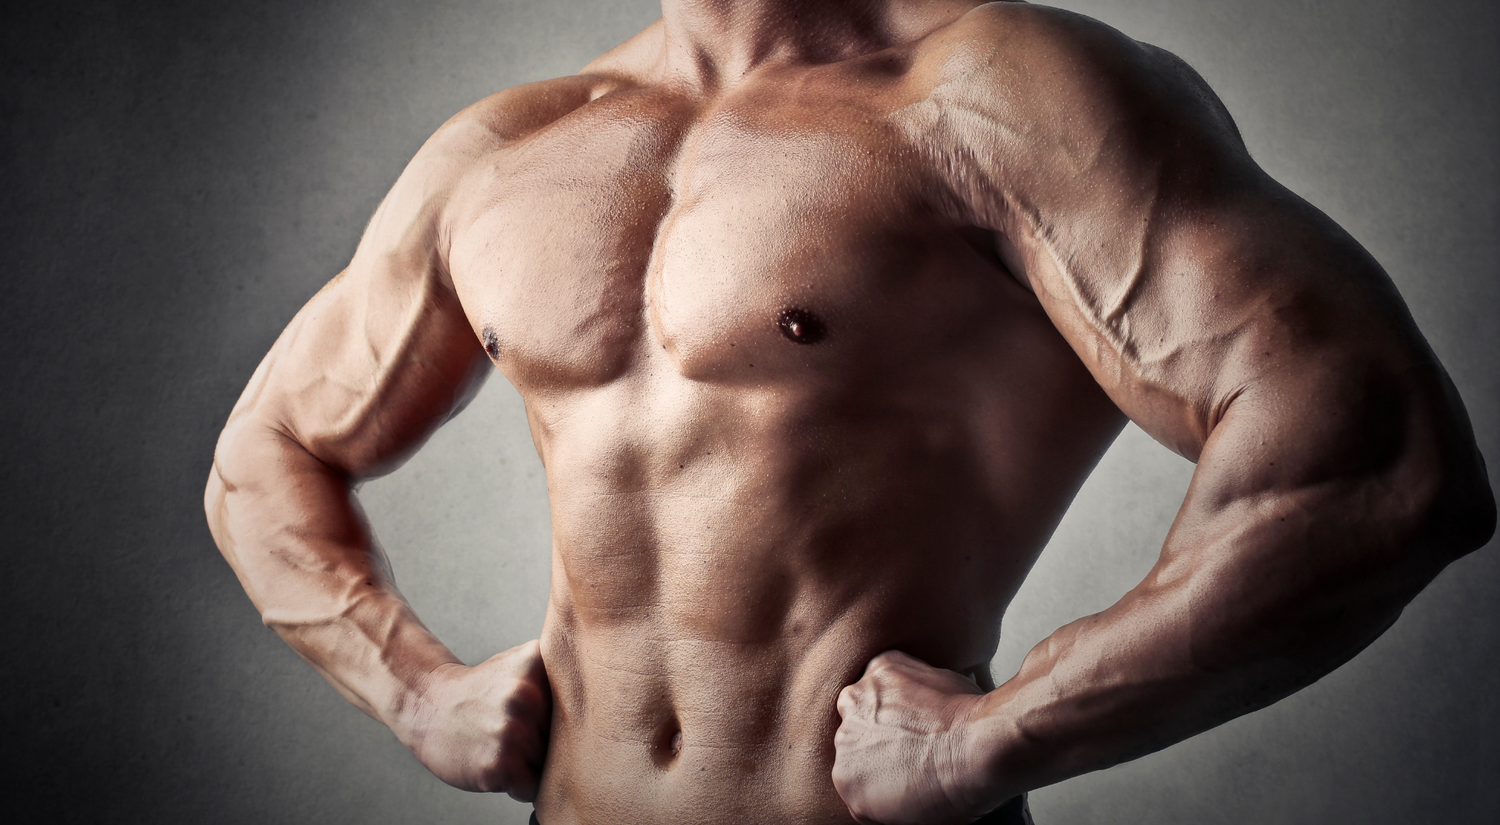 Lean Bulk: Strategies for Gaining Muscle Without Fat